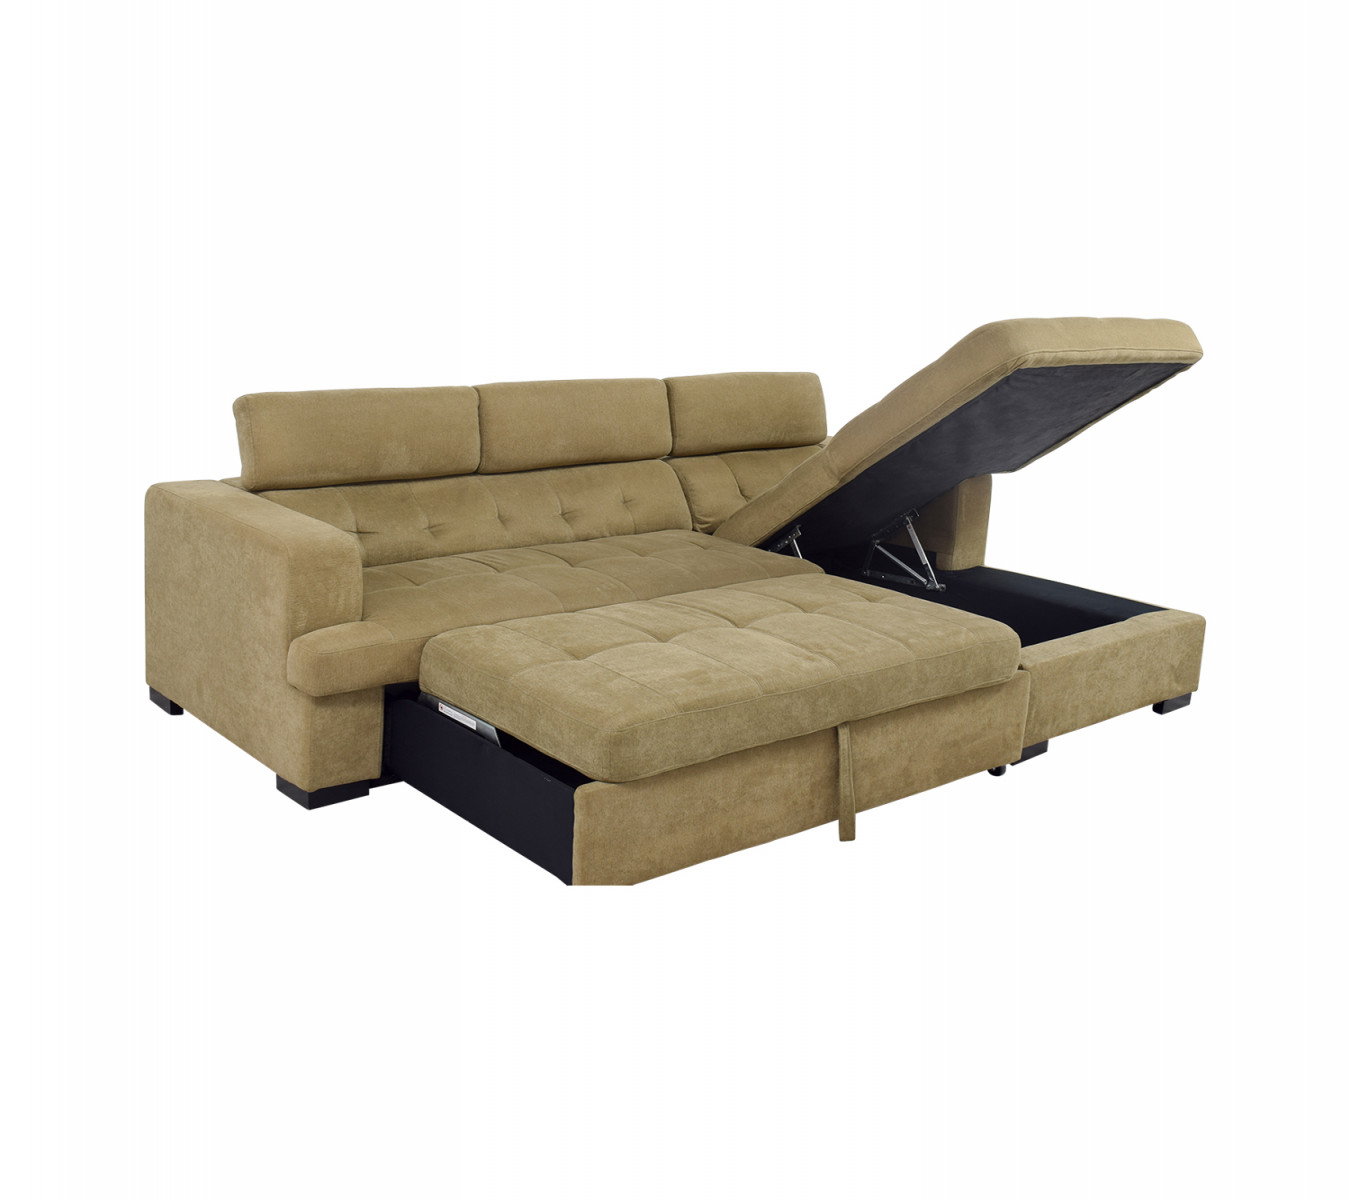 Bobs Furniture Pull Out Bed Flash Sales, SAVE %.